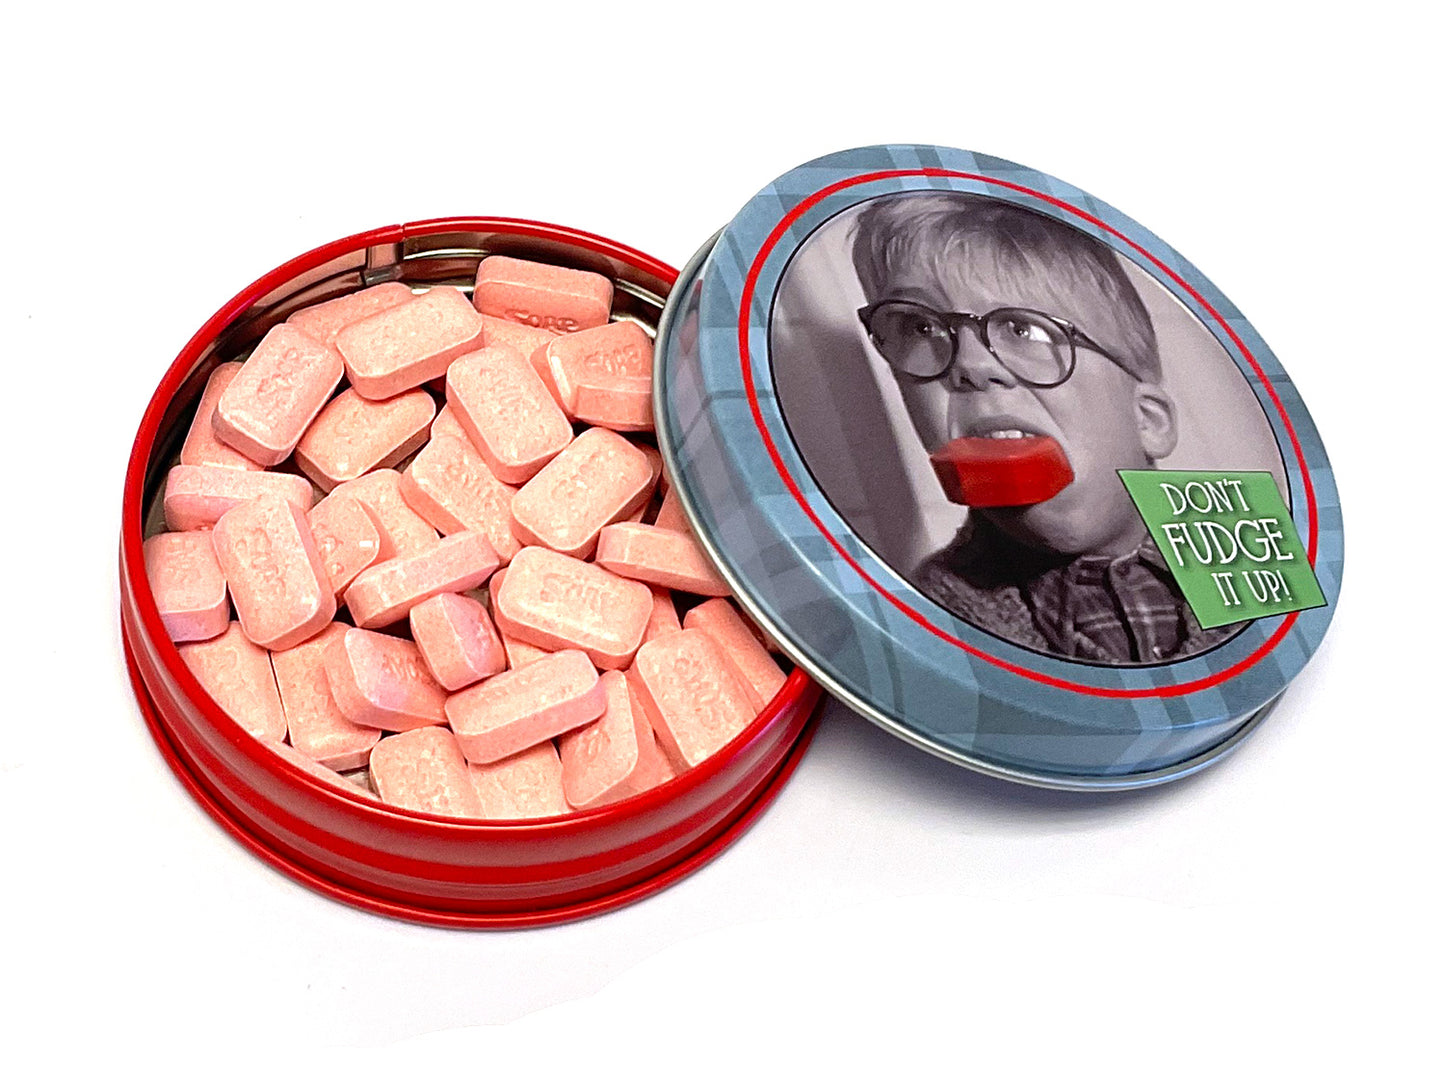 A Christmas Story Don't Fudge It Up - 1.2 oz tin open